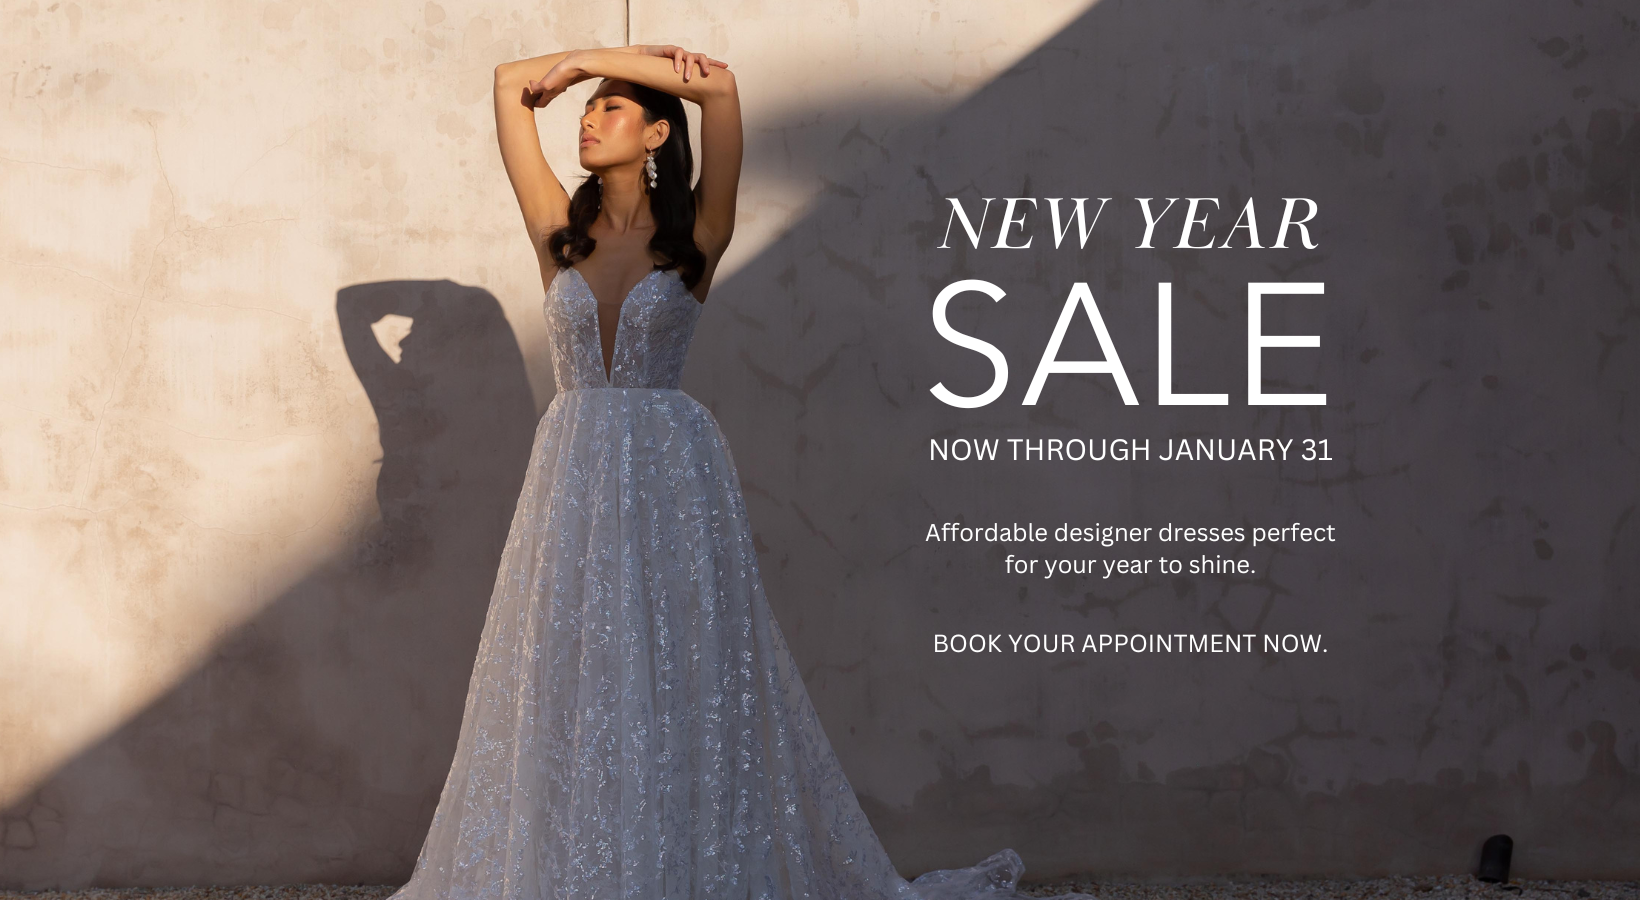 New Year Sale going on now at Luv Bridal